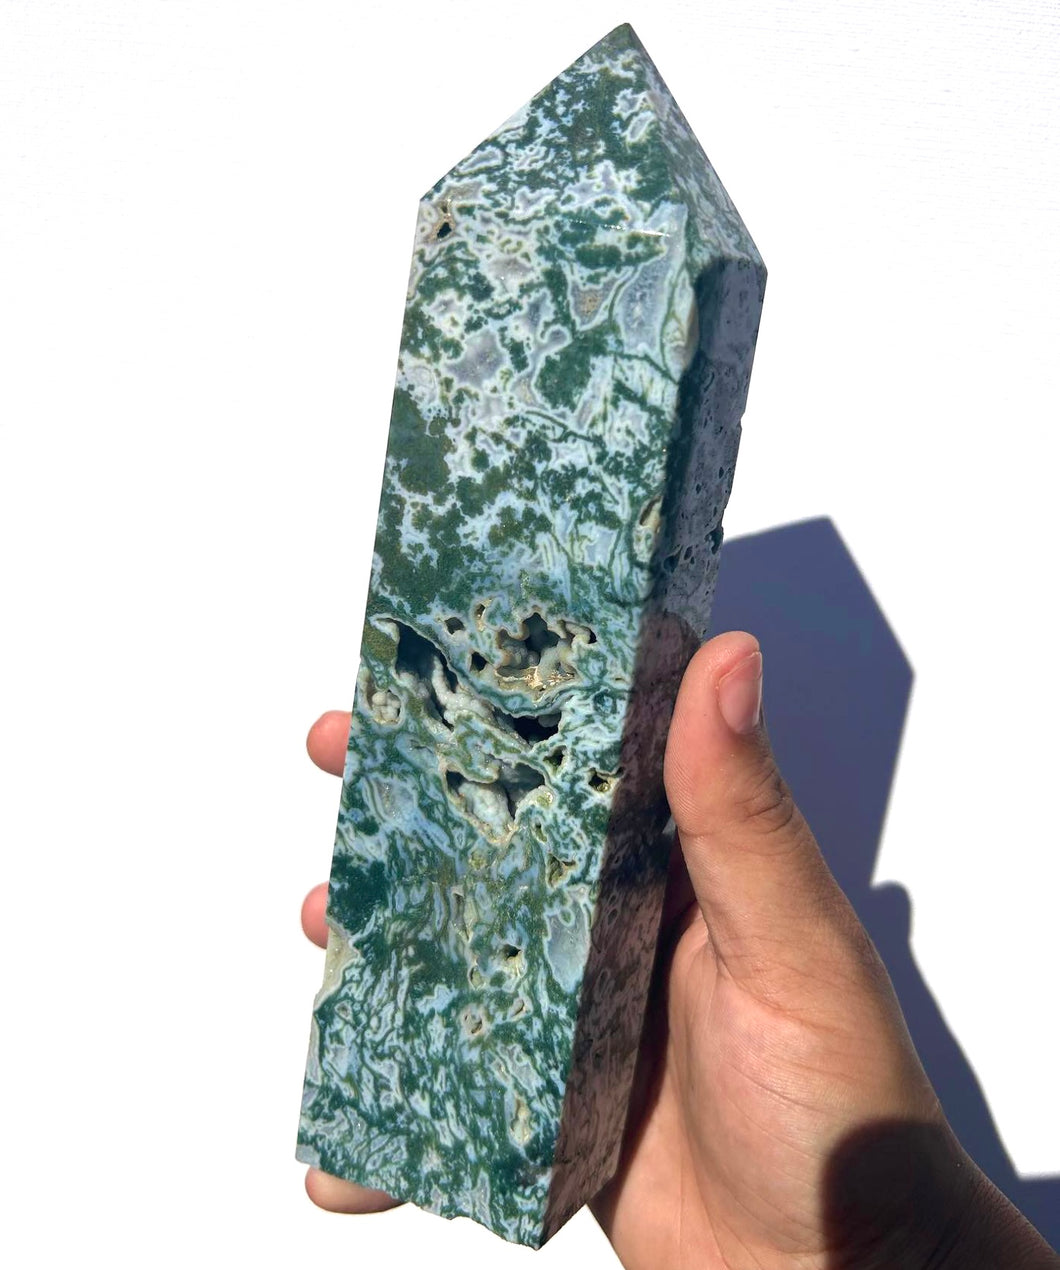 ⊹ XXL Moss Agate Tower ⊹ Choose Your Own ⊹ NEW!